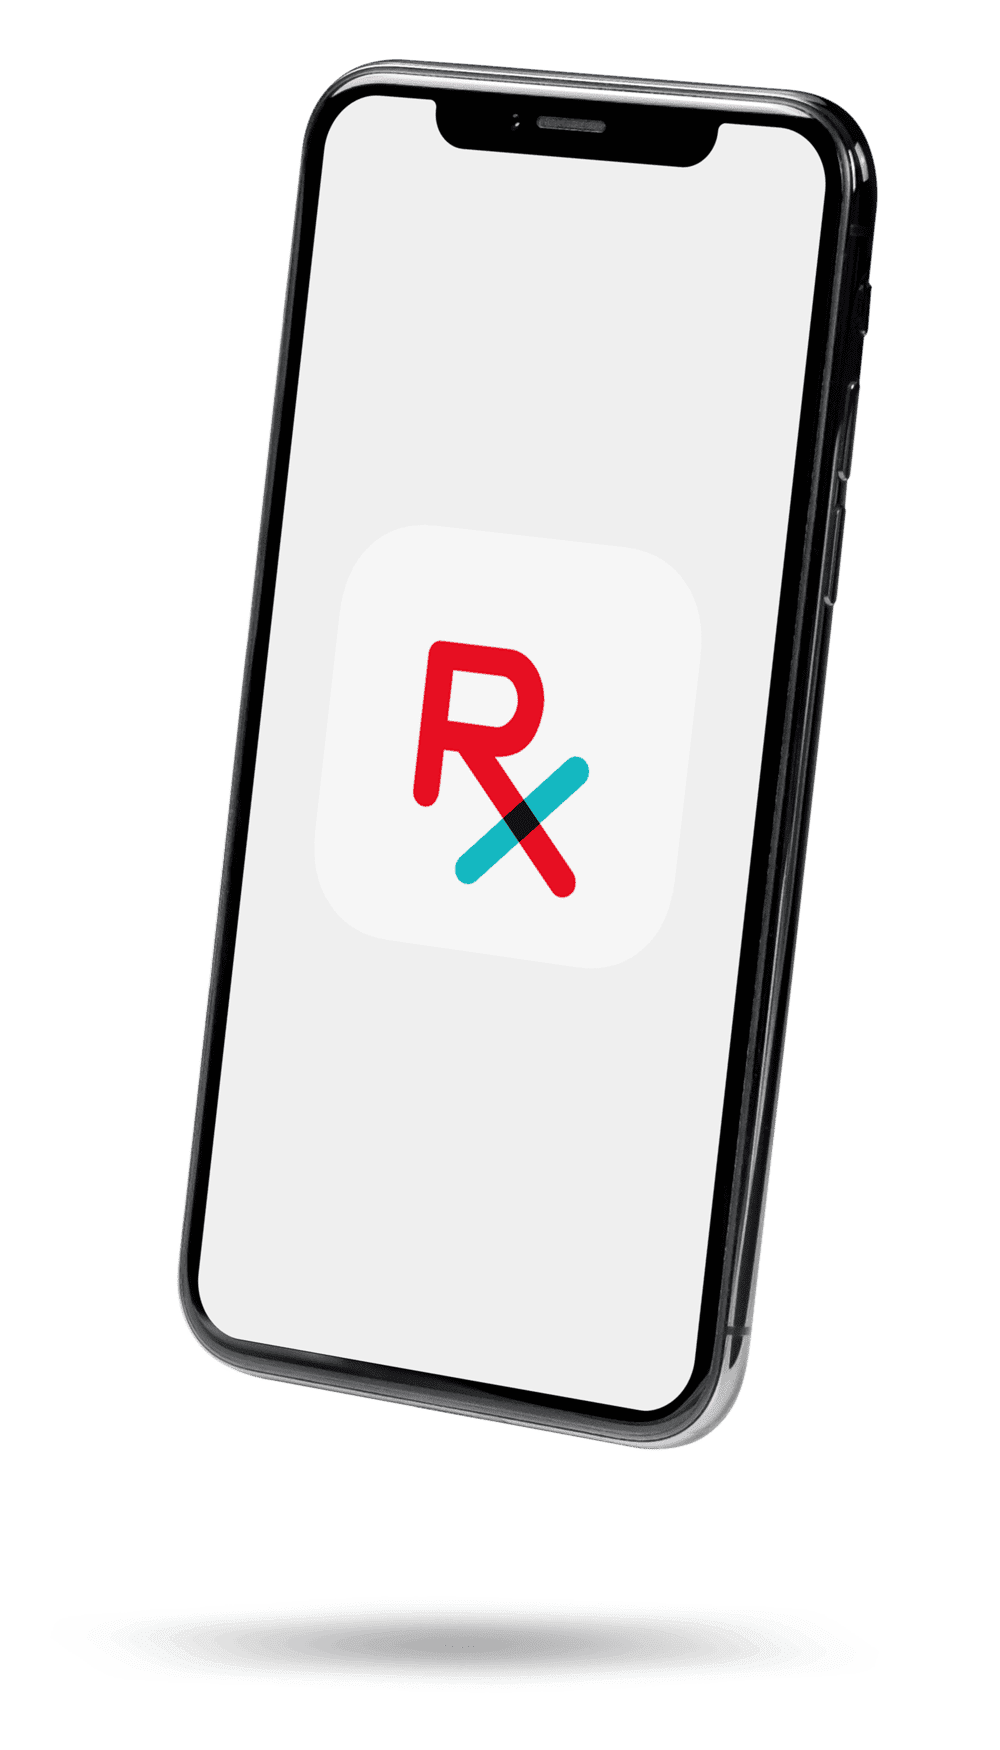 A phone with the rx symbol on it.